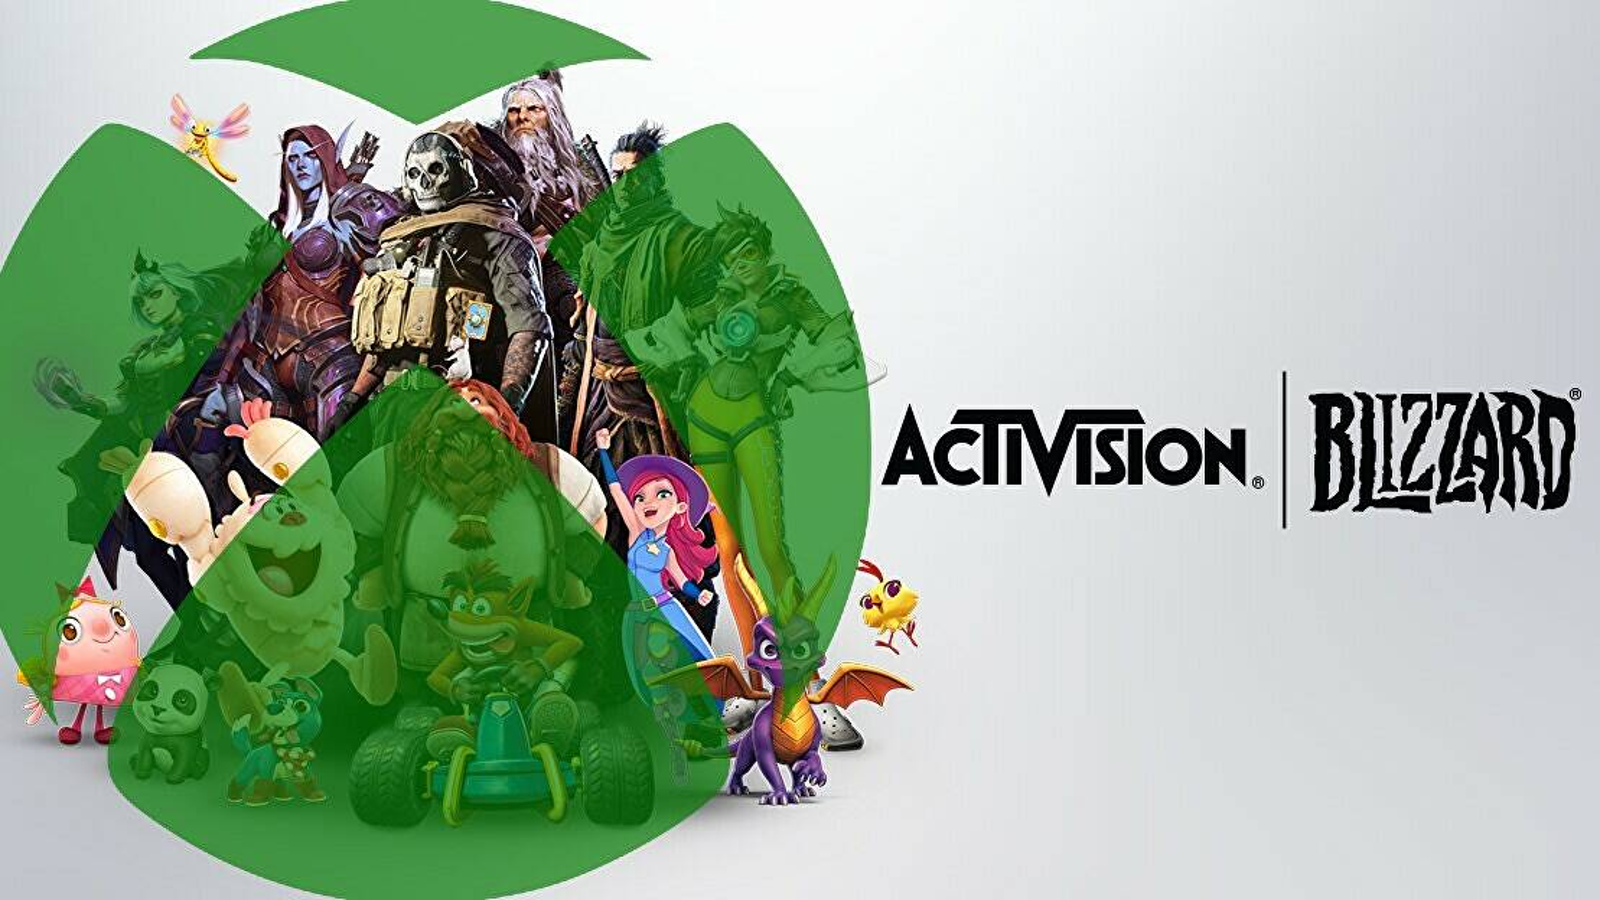 FTC Trying To Stop Microsoft's Purchase Of Activision Blizzard